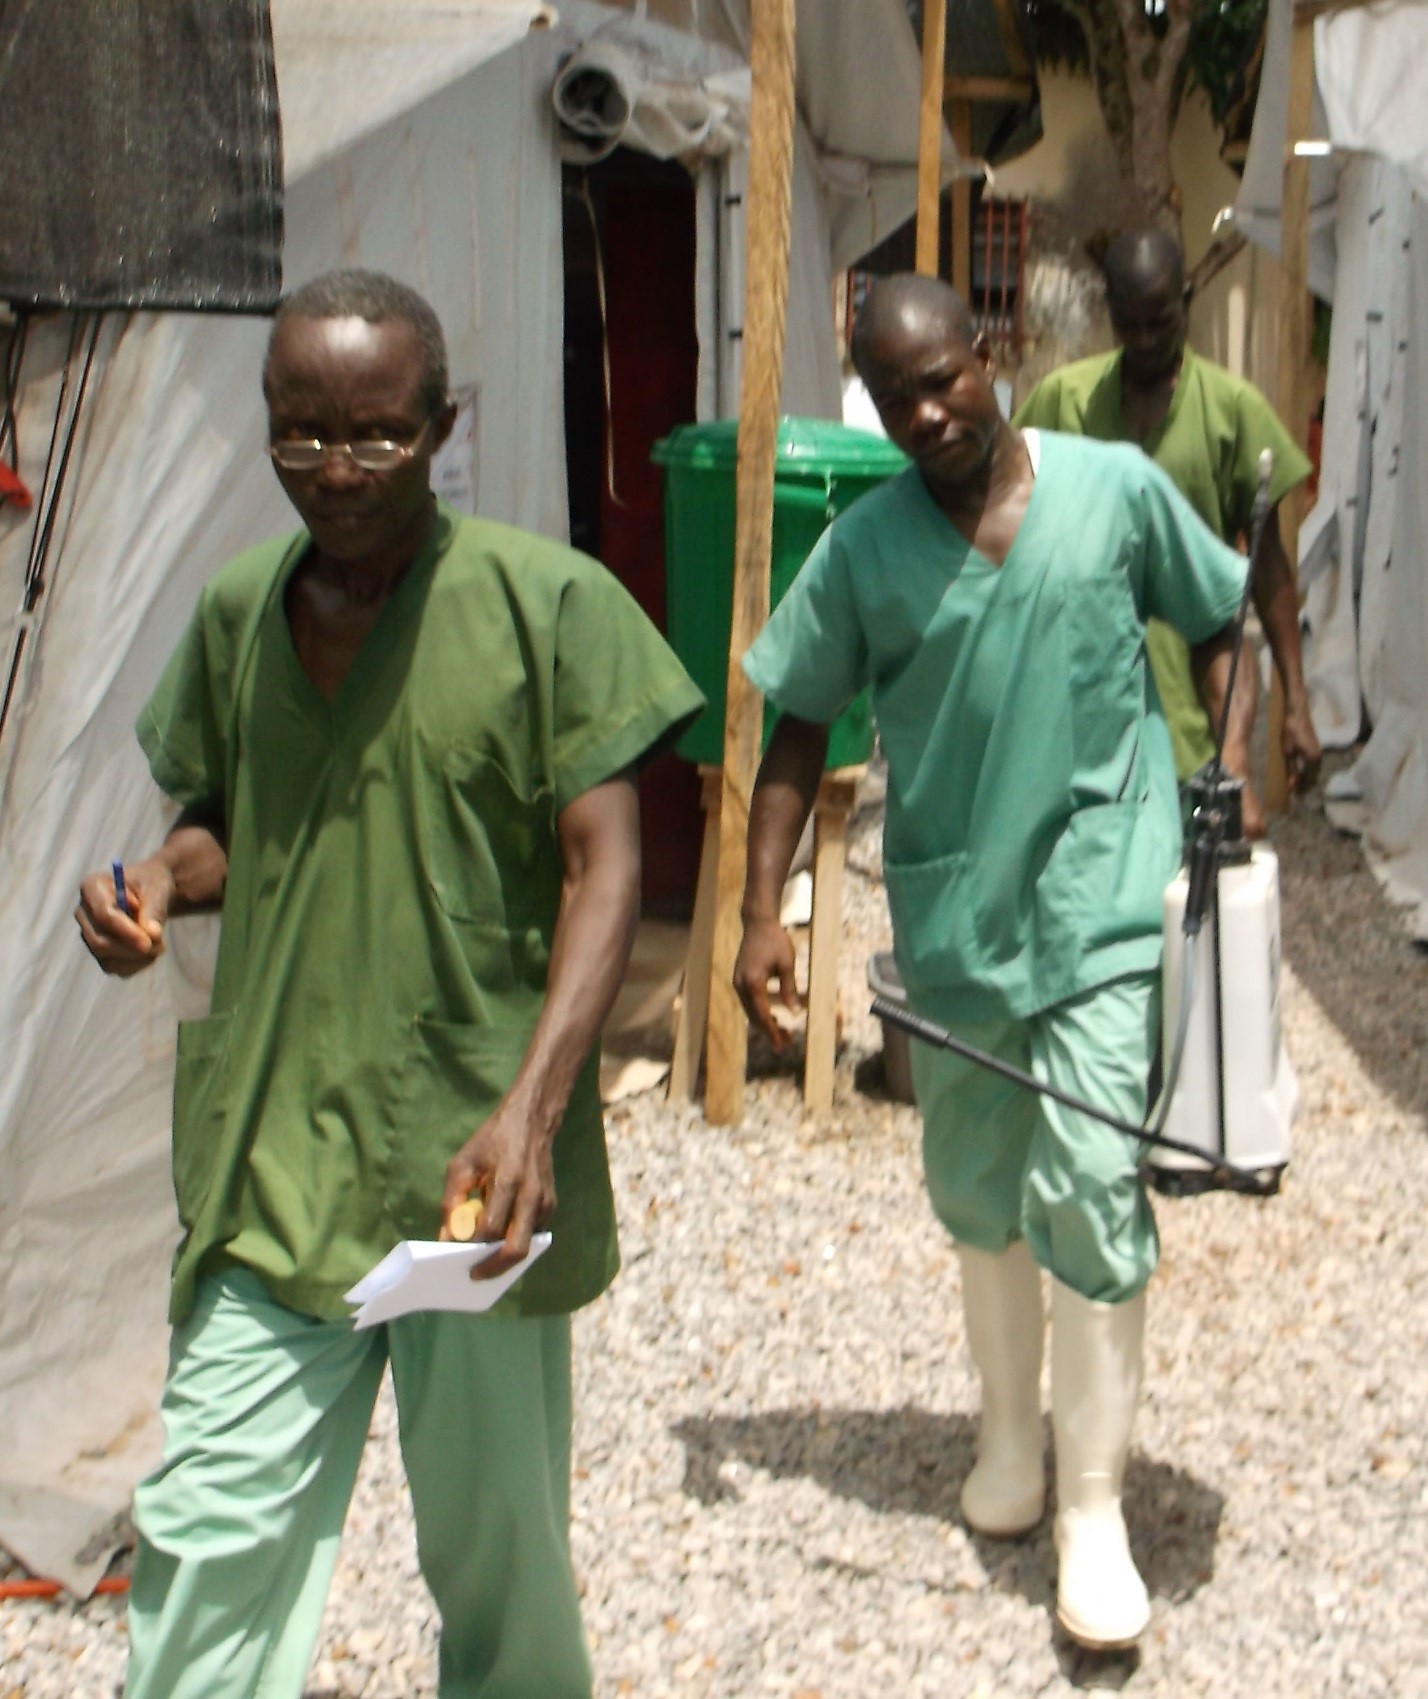 Health care workers at an Ebola treatment unit – NOTE: Image is prohibited for reuse